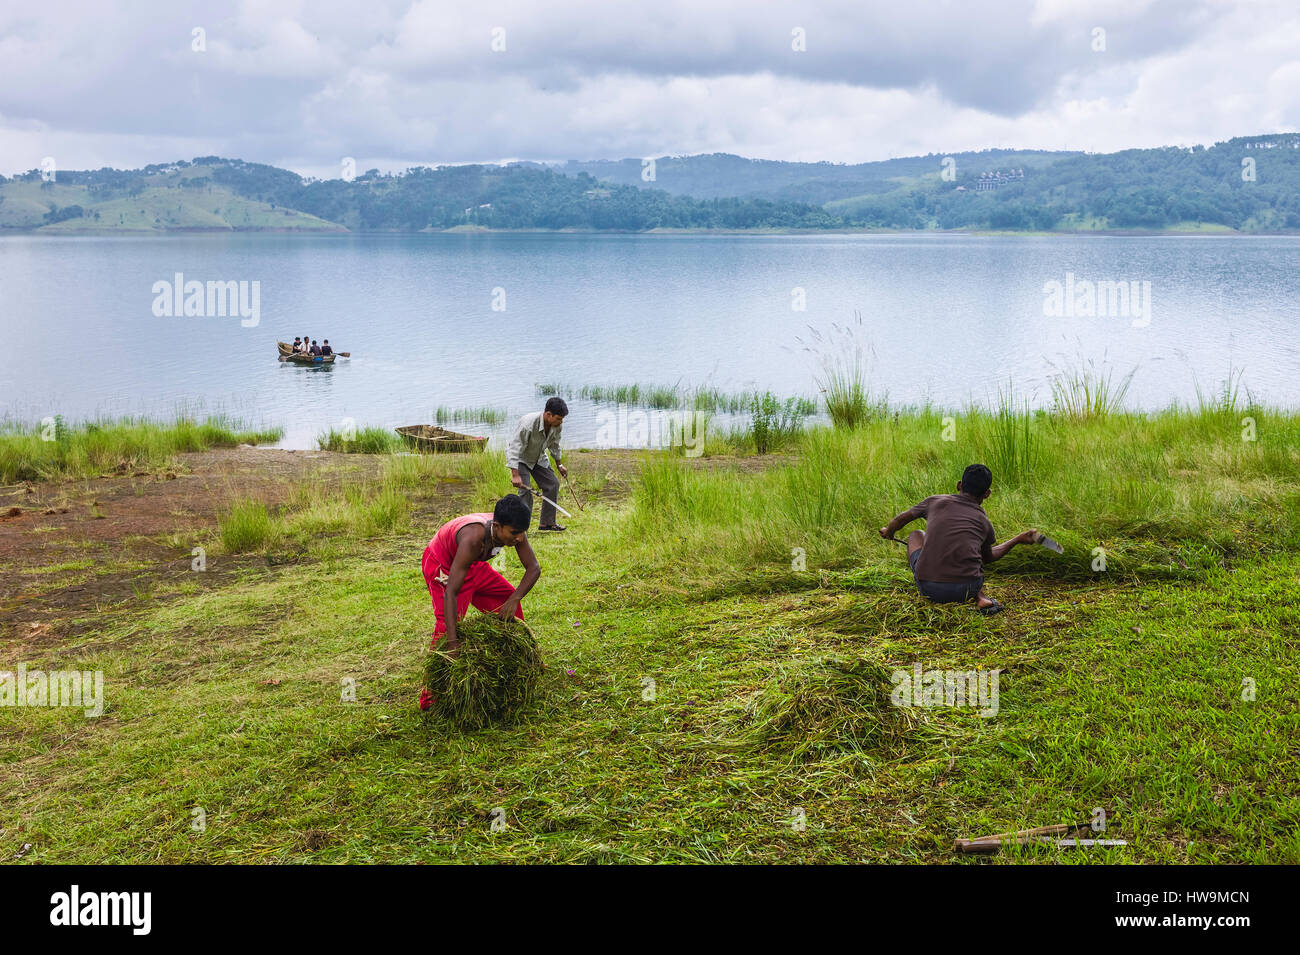 Umiam lake with men cutting grass along bank and wooden boat with passengers on the water near Shillong, Meghalaya, India. Stock Photo